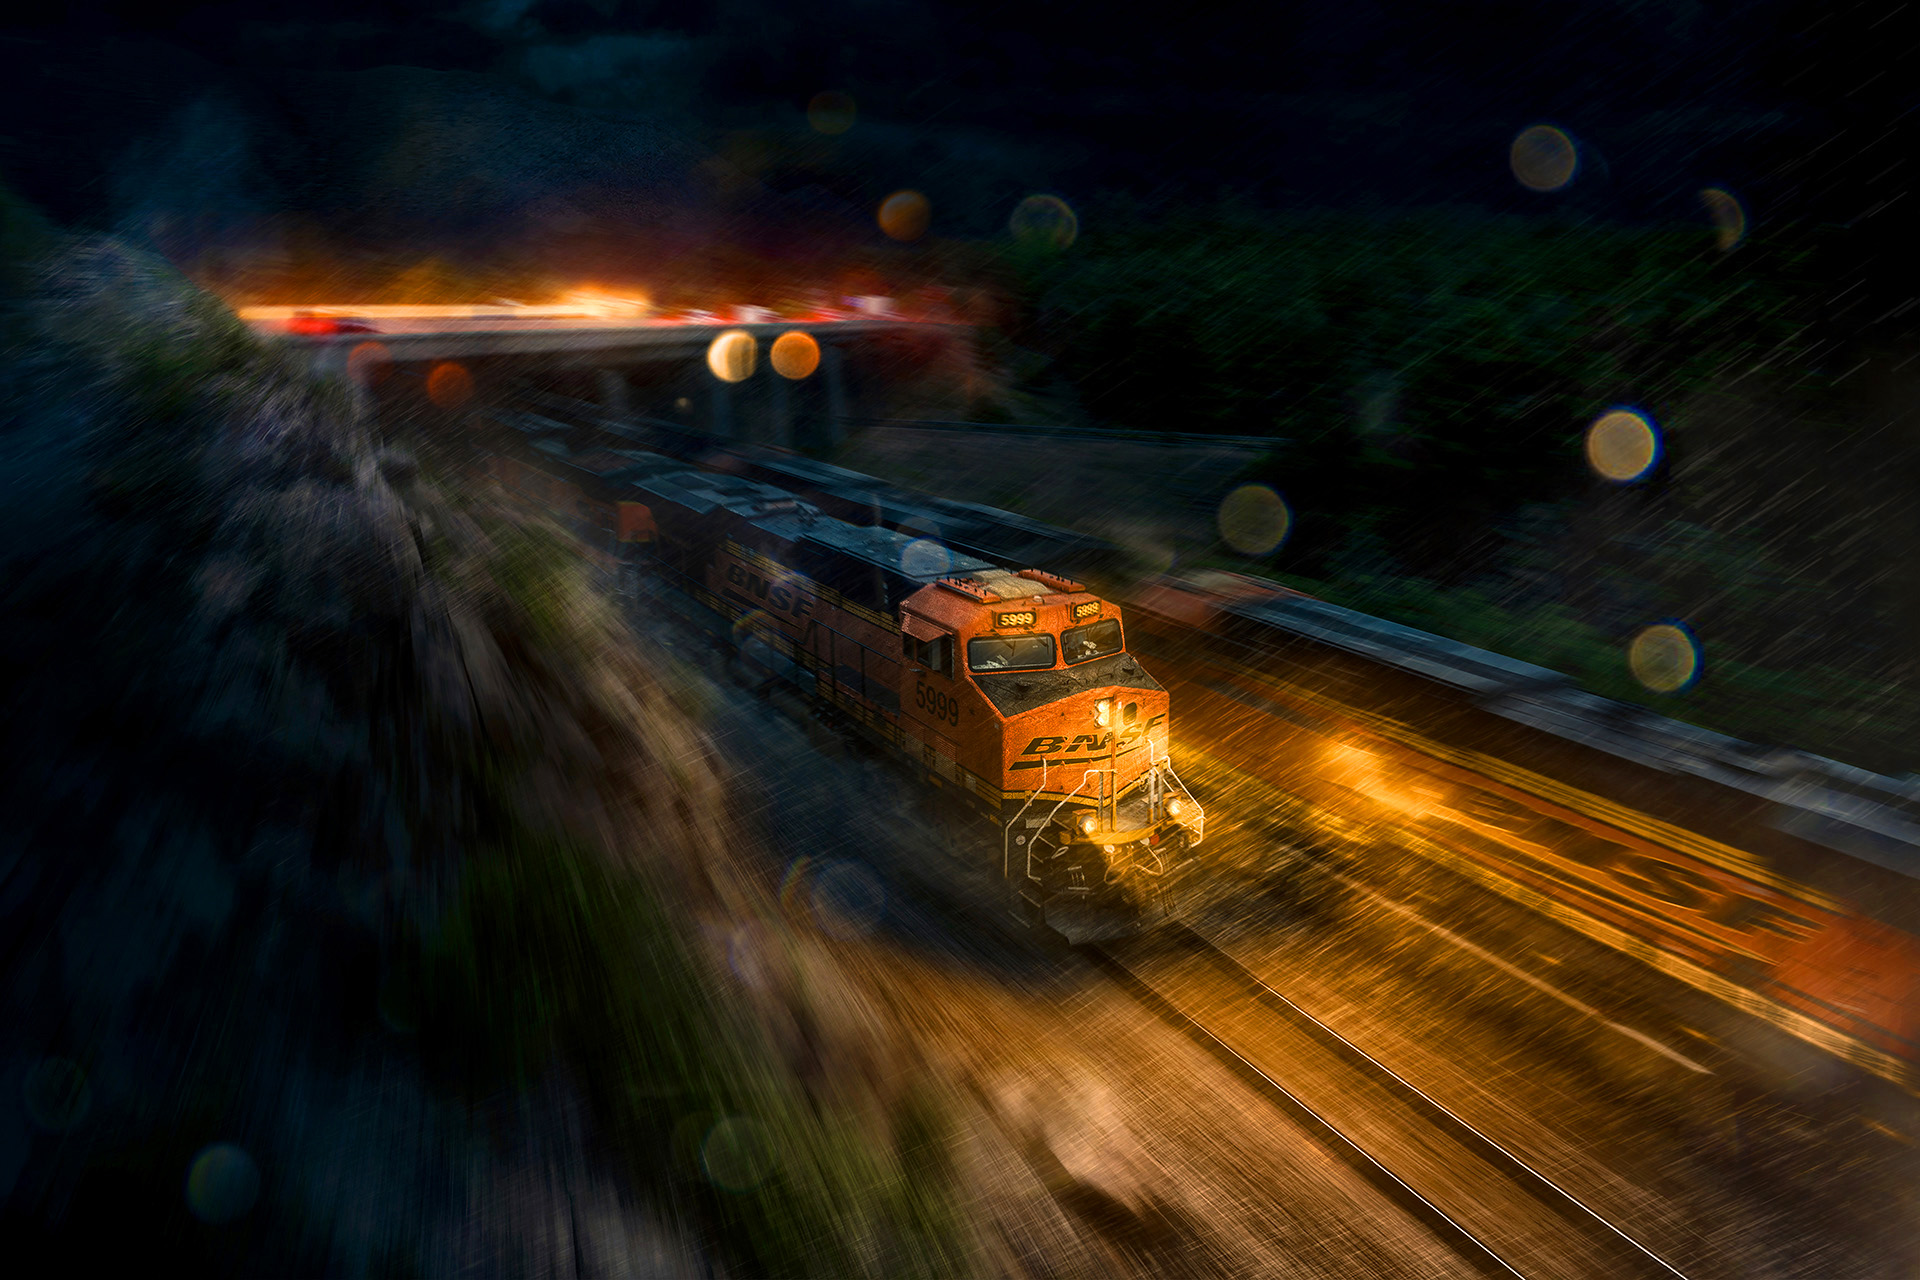 BNSF Freight Trains photographed by Commercial Automotive Photographer Blair Bunting